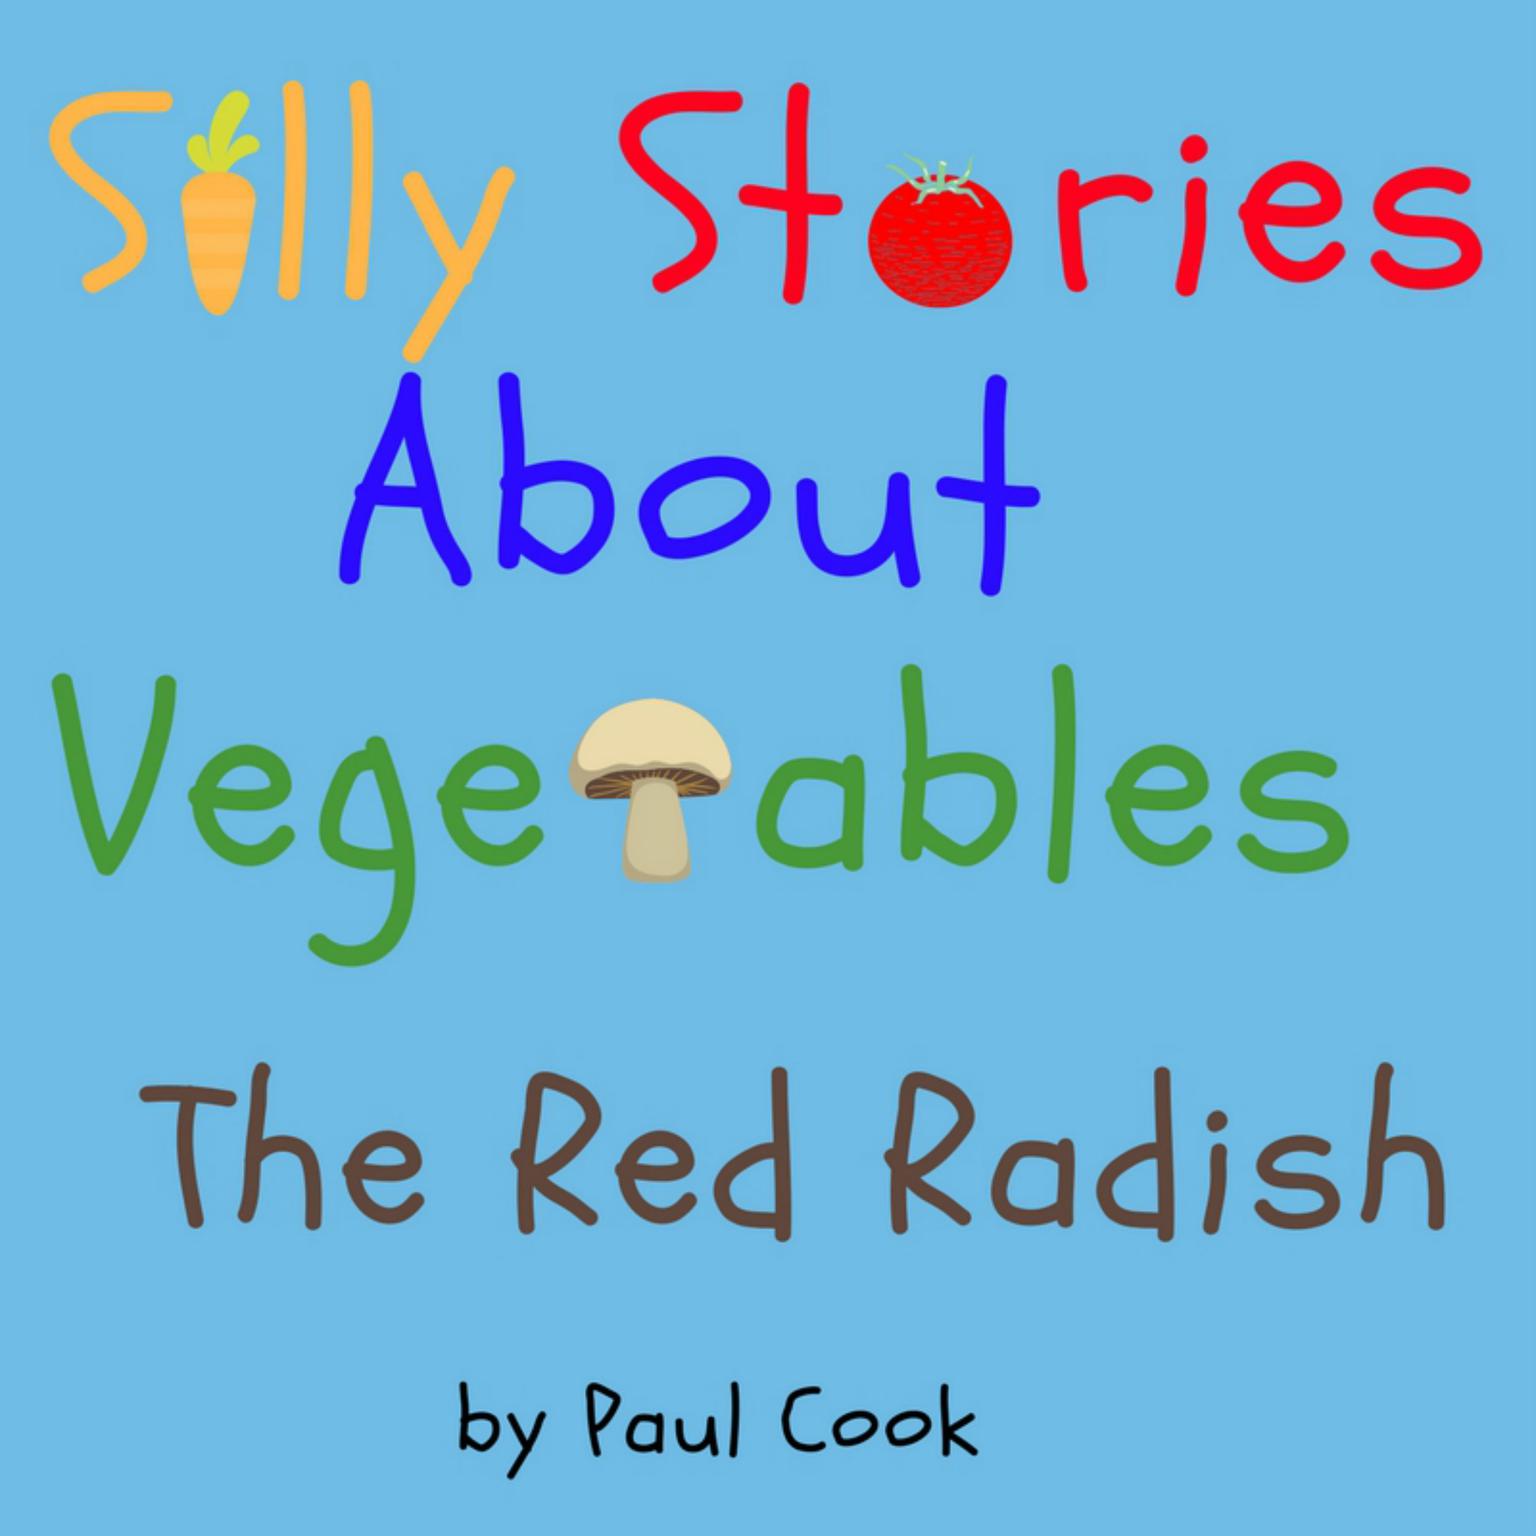 Silly Stories About Vegetables: The Red Radish Audiobook, by Paul Cook